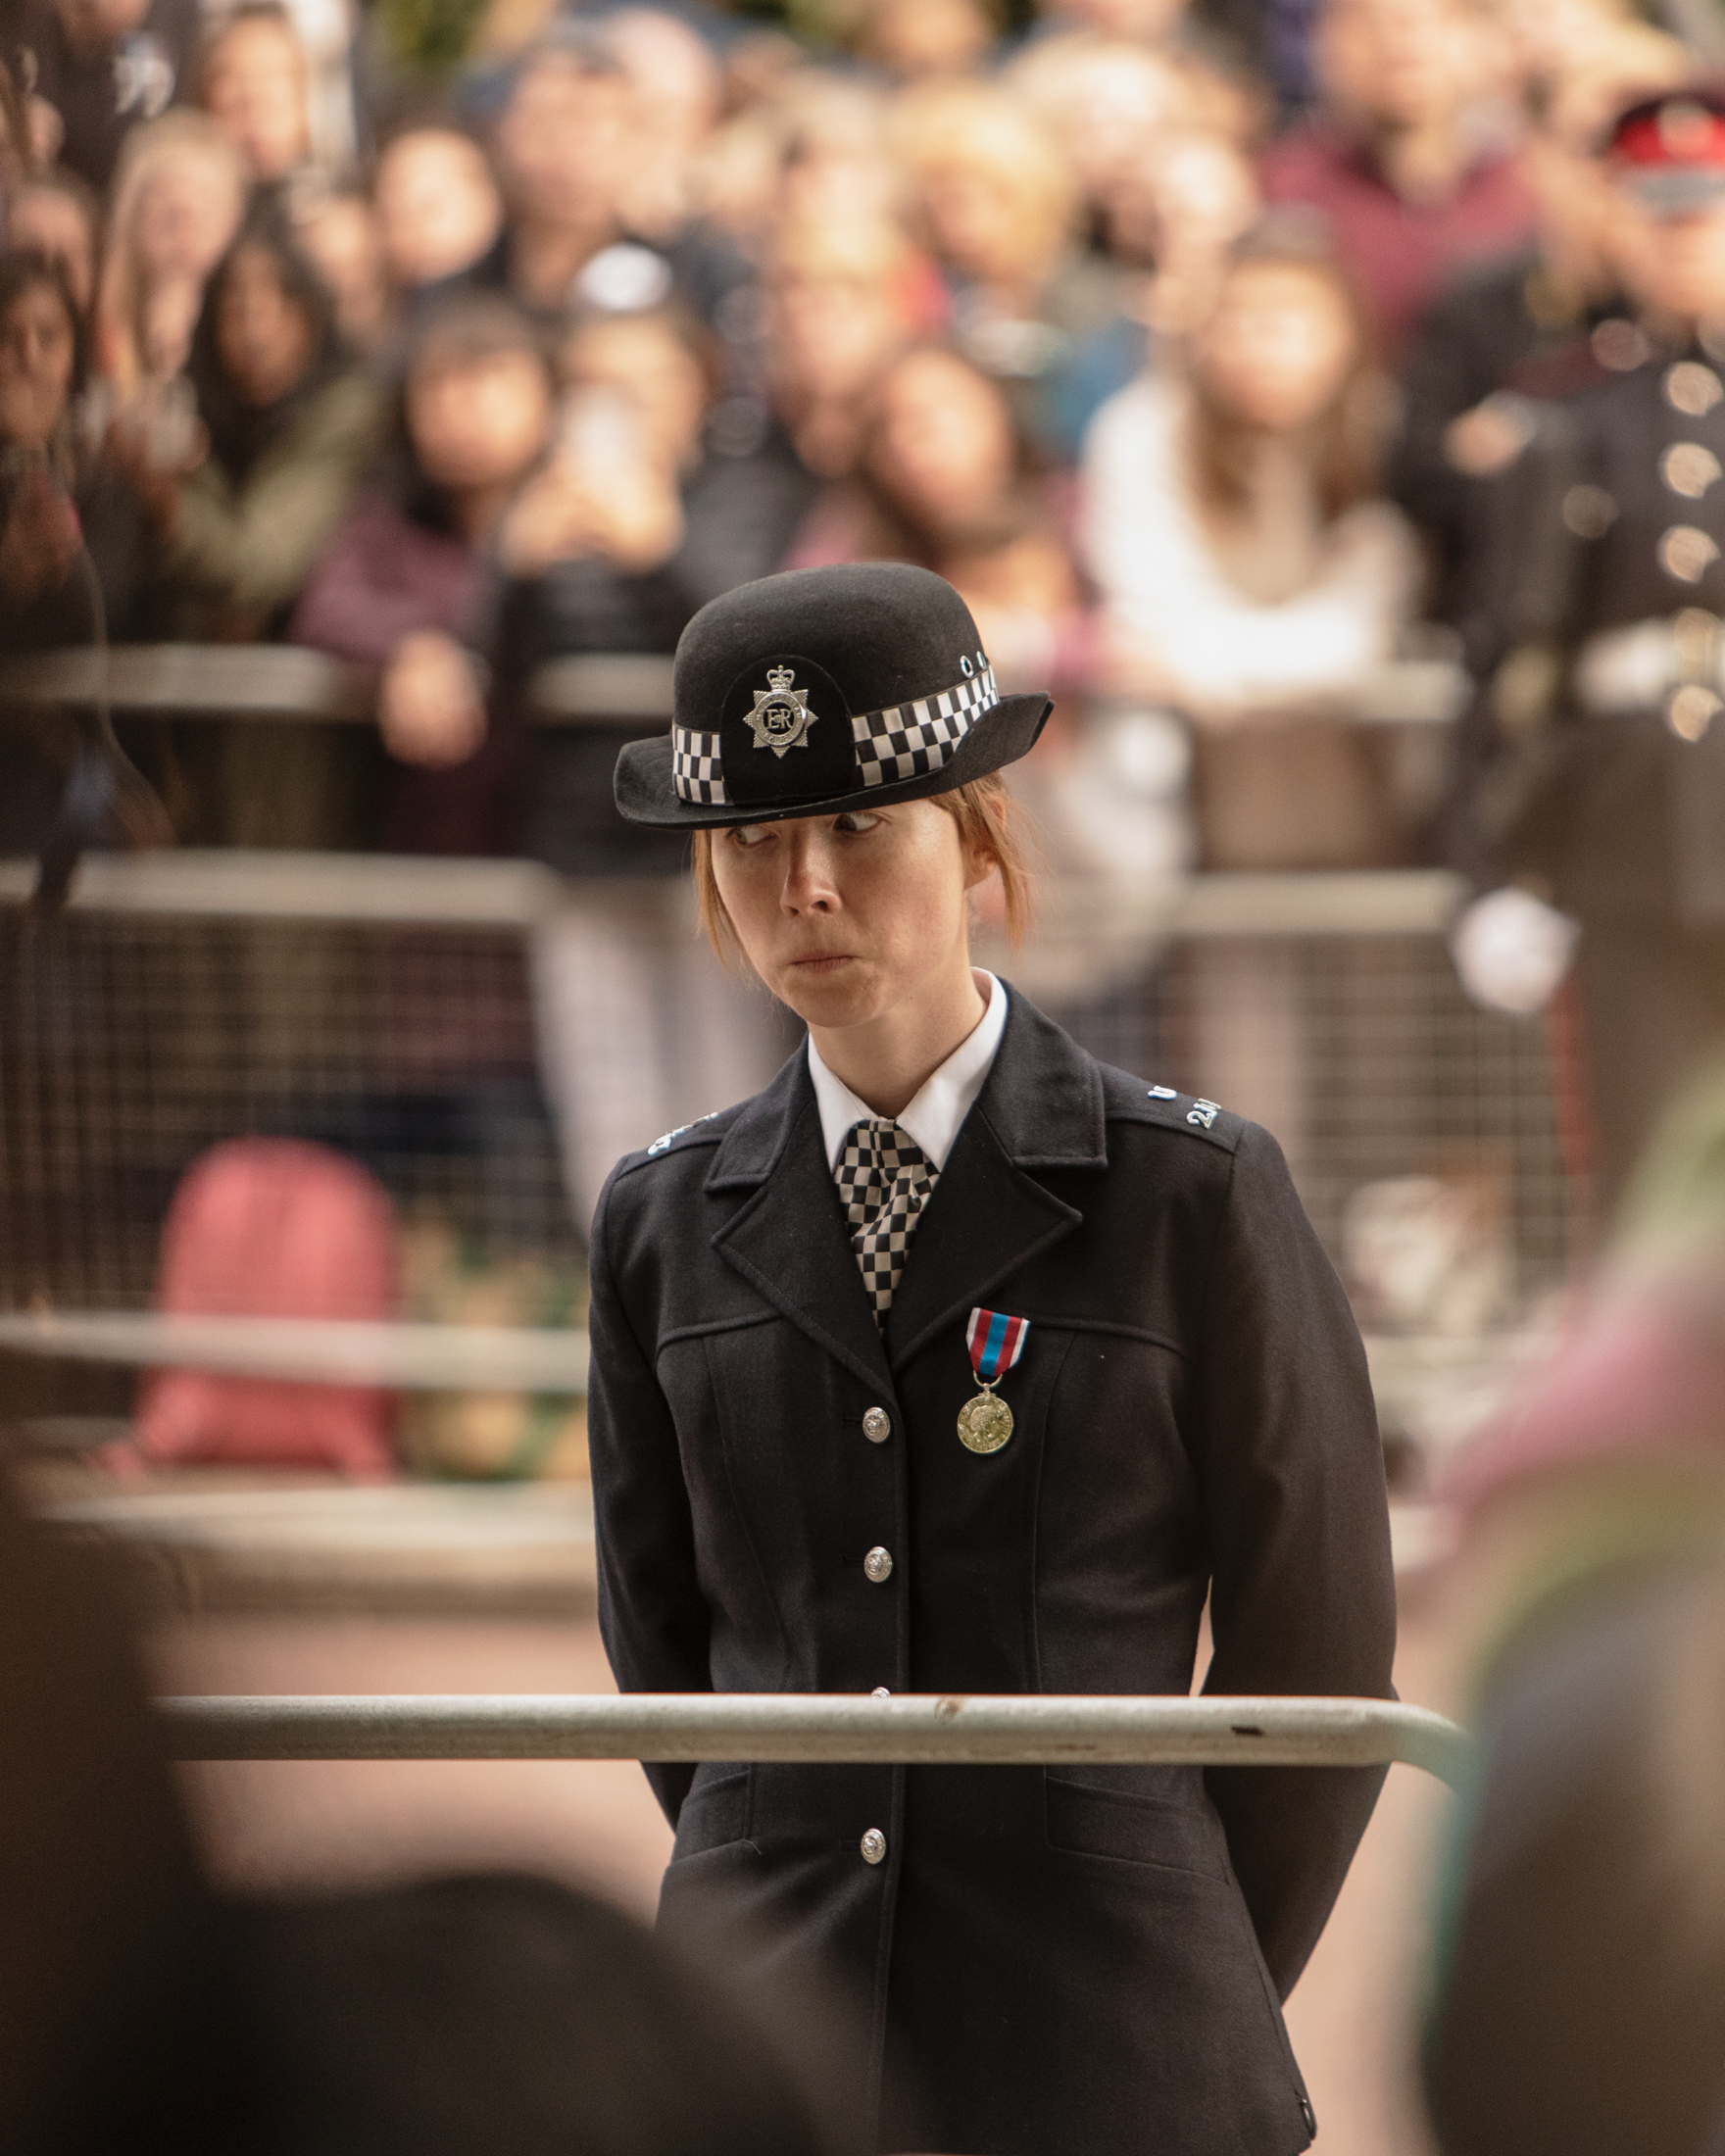 Police officer on funeral procession duties during Queen Elizabeth II's funeral